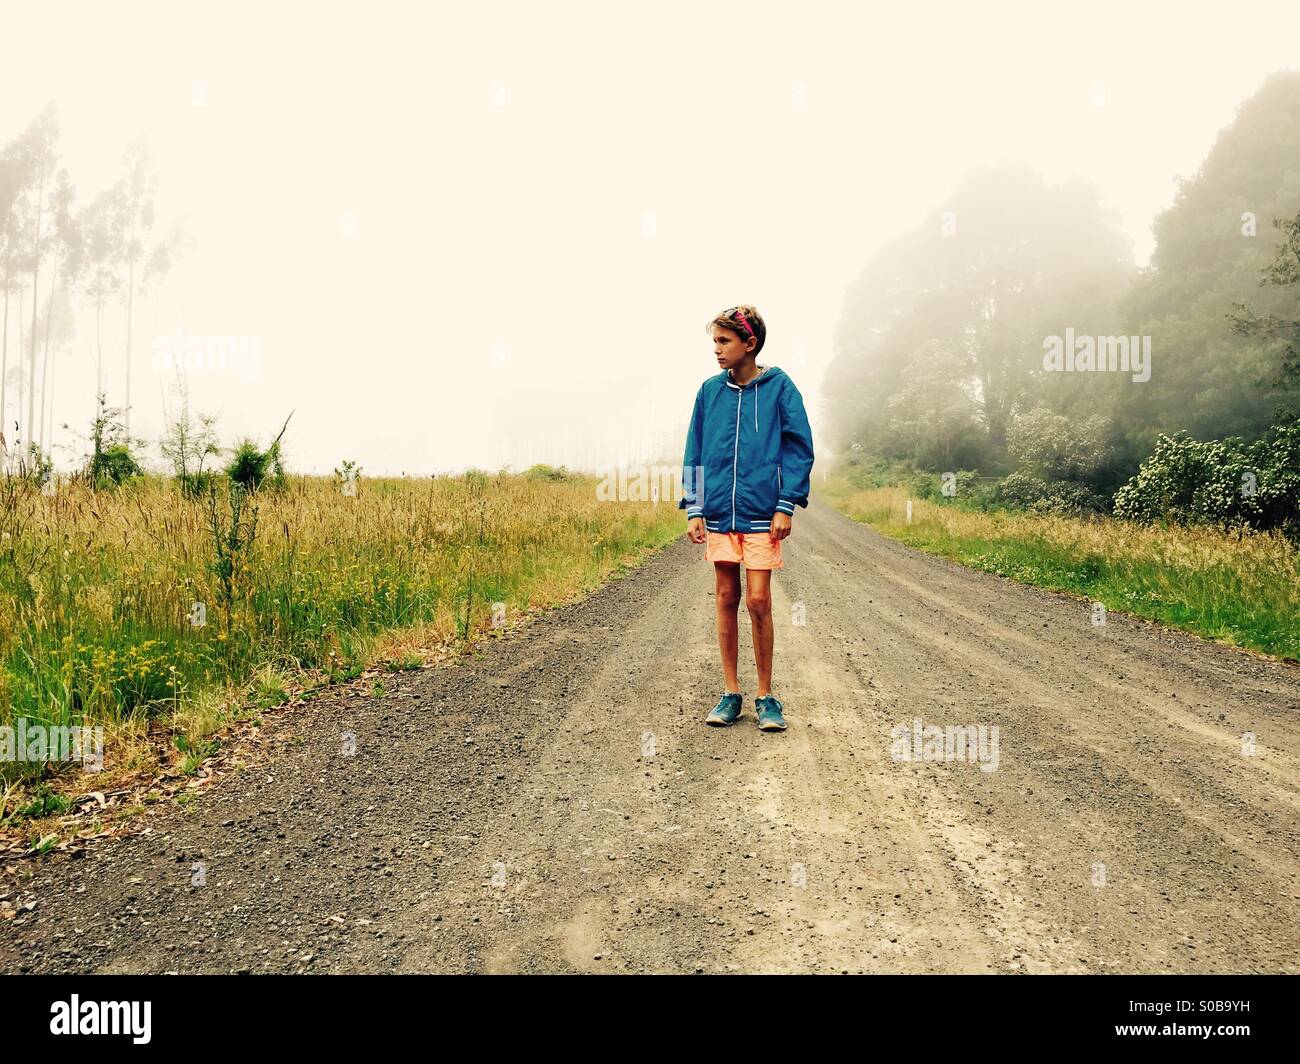 An eleven year old boy walking down a country track on a foggy day Stock Photo